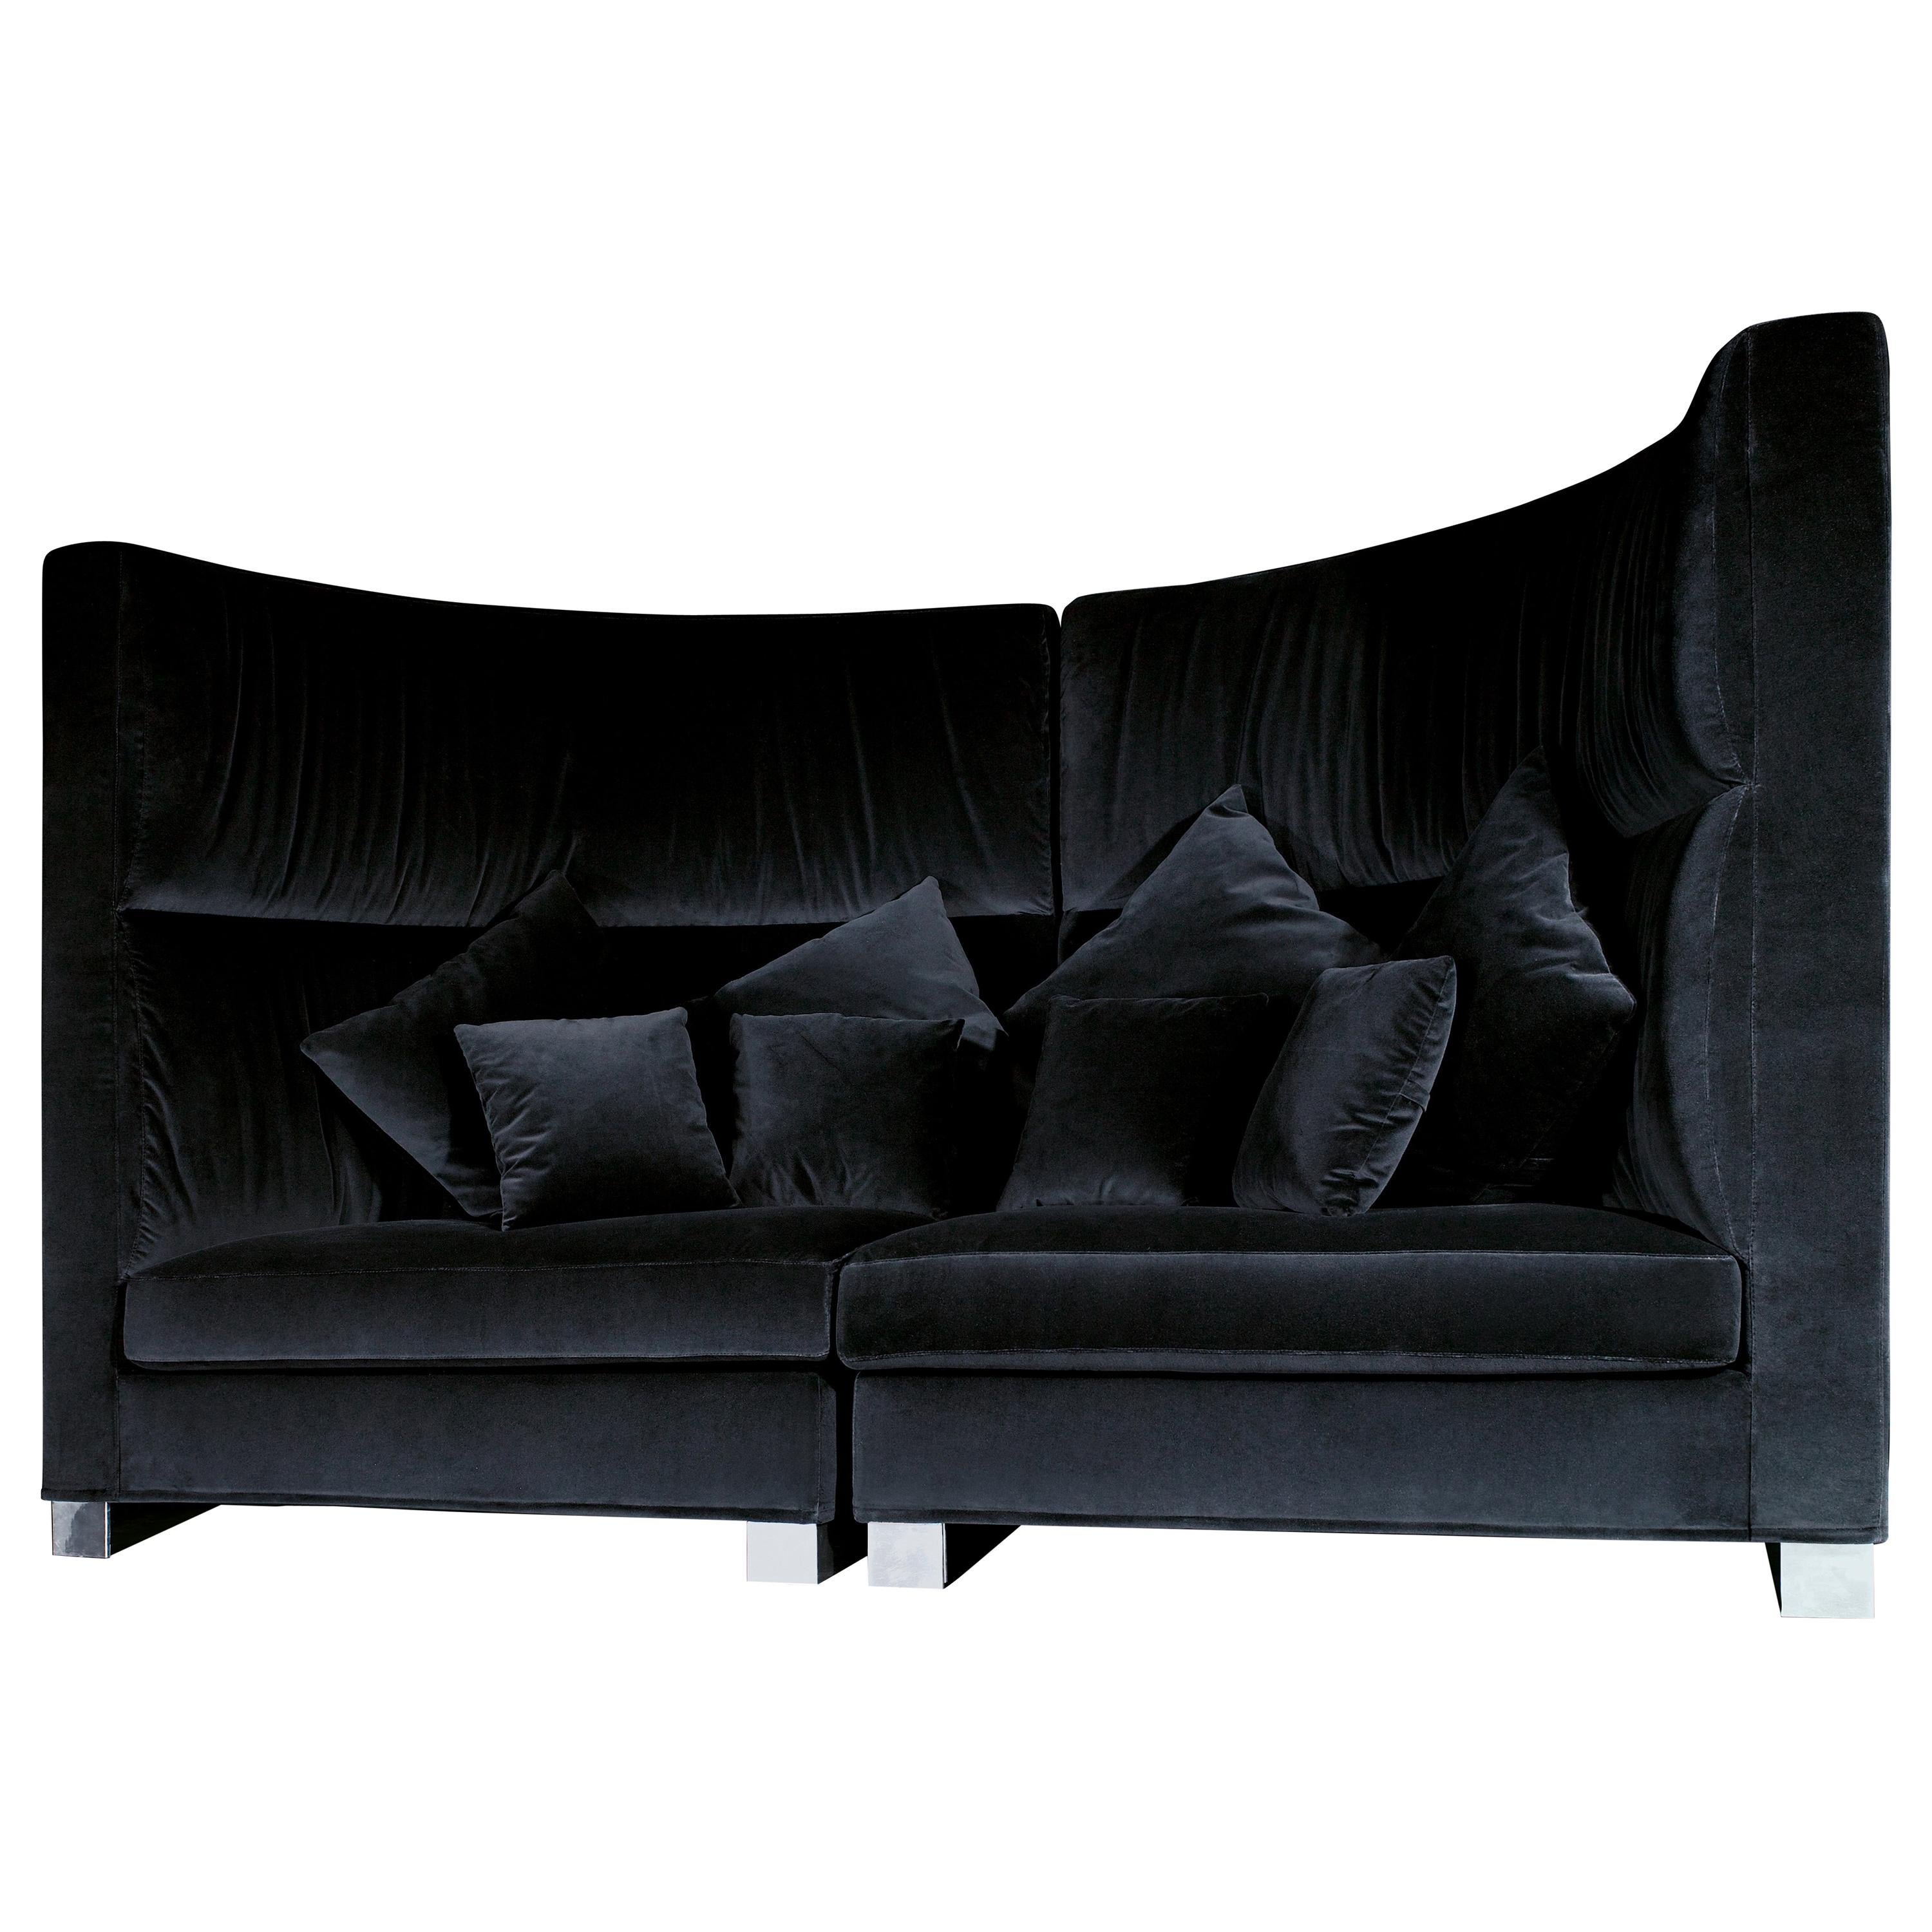 VG-VGnewtrend Sectional Sofas